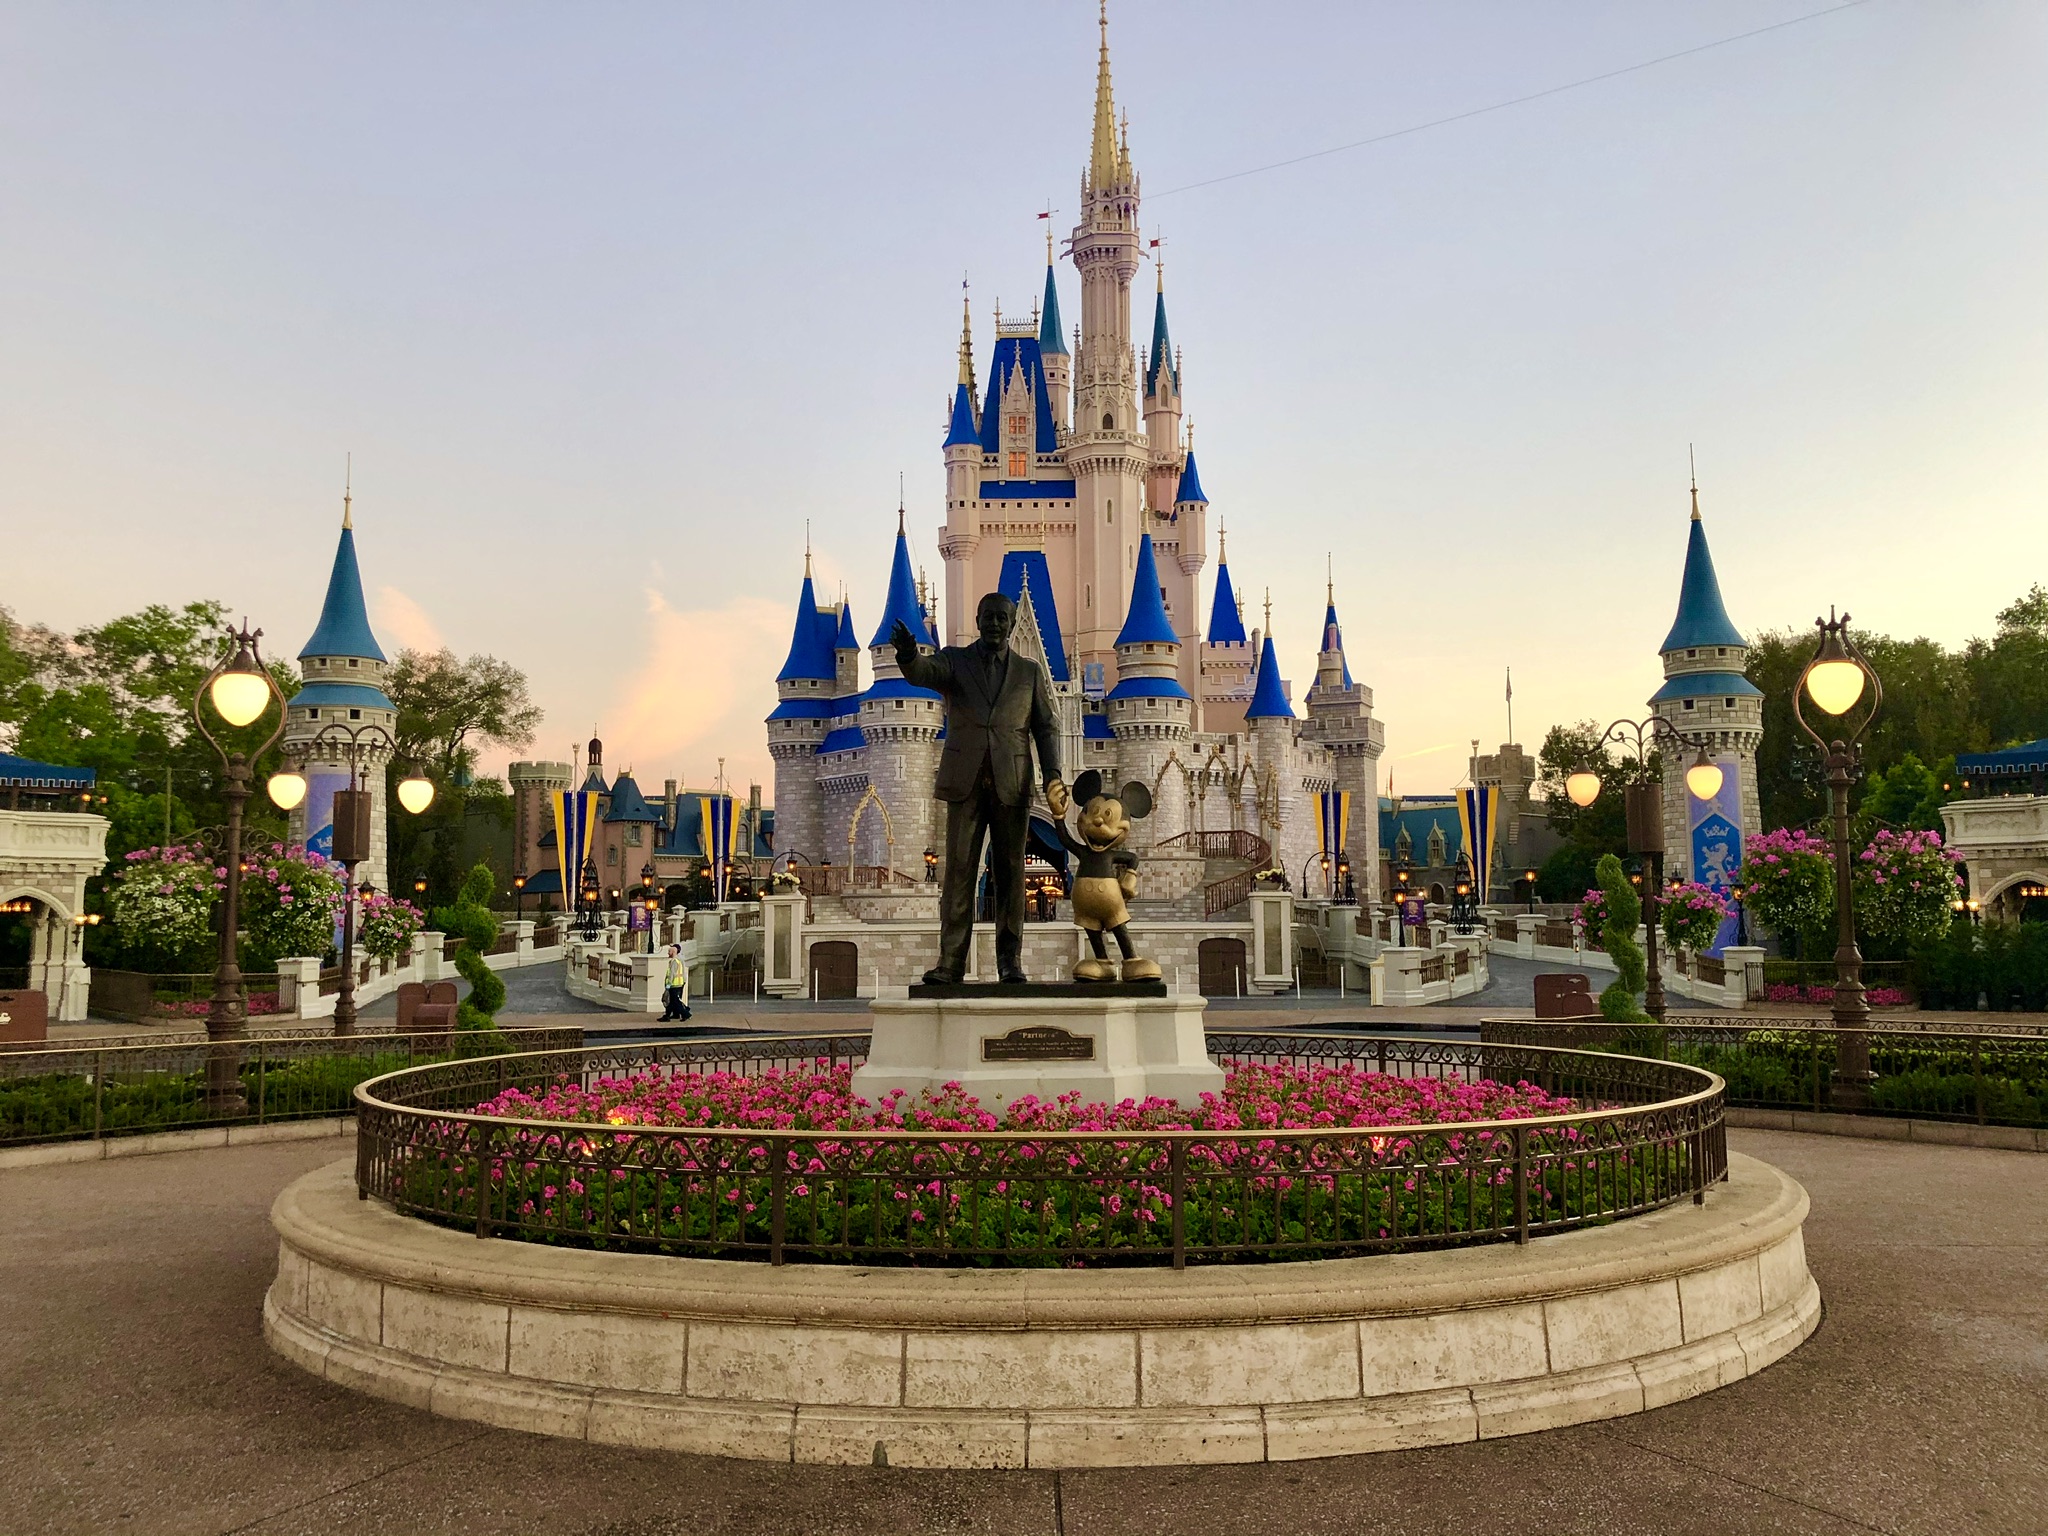 Do you know how I can get from Orlando International Airport to Disney World?